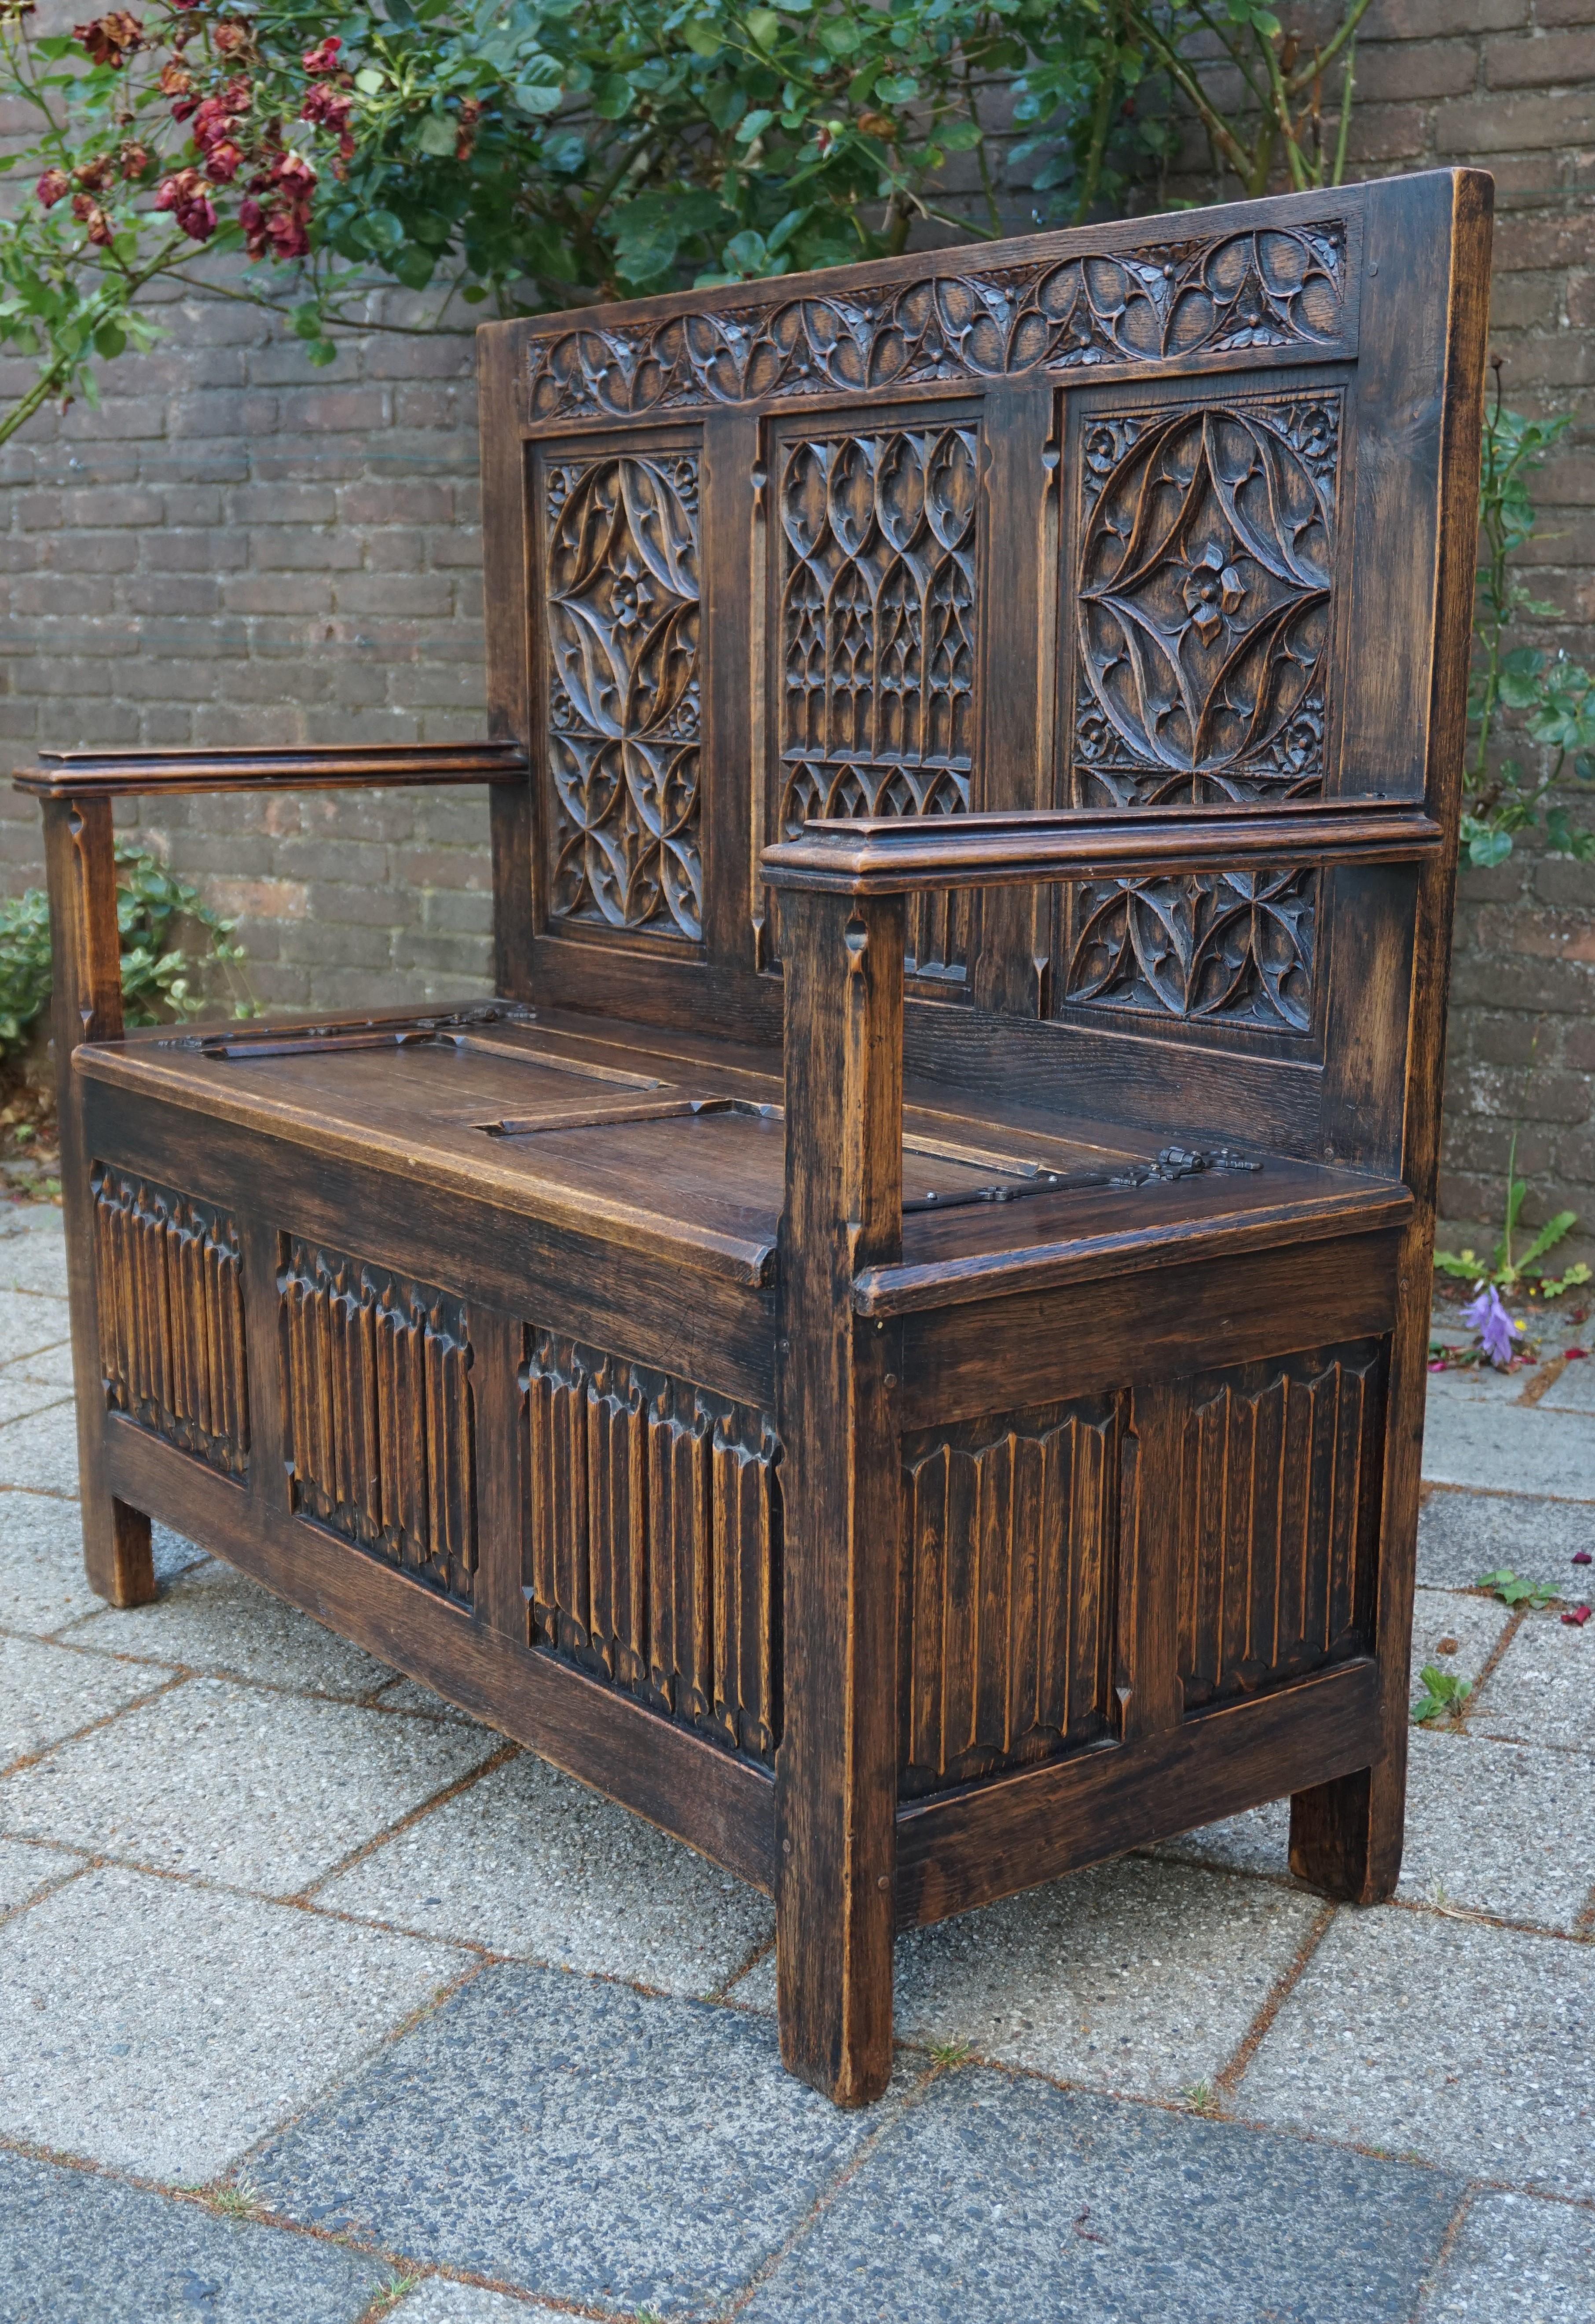 Rare Gothic bench with top quality carved, church window-like panels.

This beautifully and deeply carved, oak church bench from the early 1900s is in amazing condition. It comes with top quality carved details and you could not wish for a more